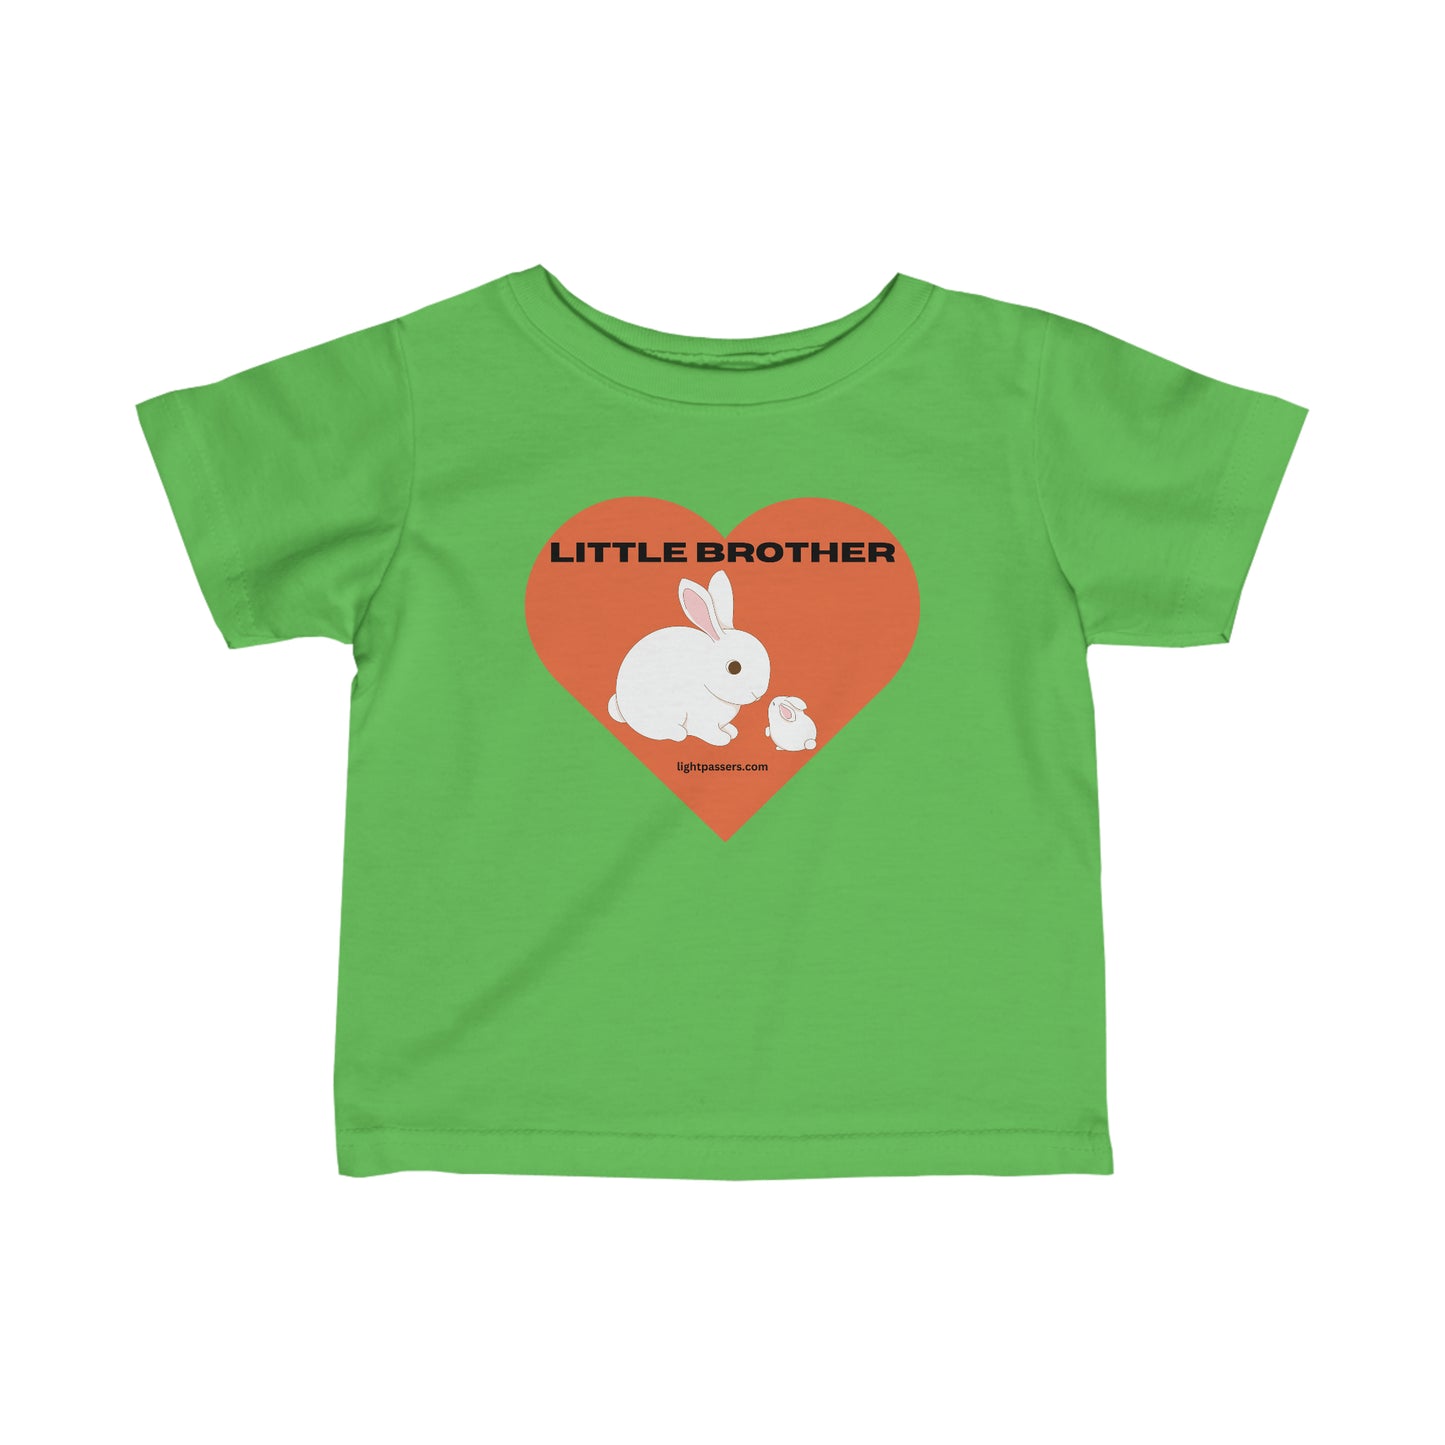 A green infant tee with a white rabbit and heart design. Side seams, ribbed knitting, and taped shoulders for durability and comfort. 100% combed ringspun cotton, light fabric, classic fit.